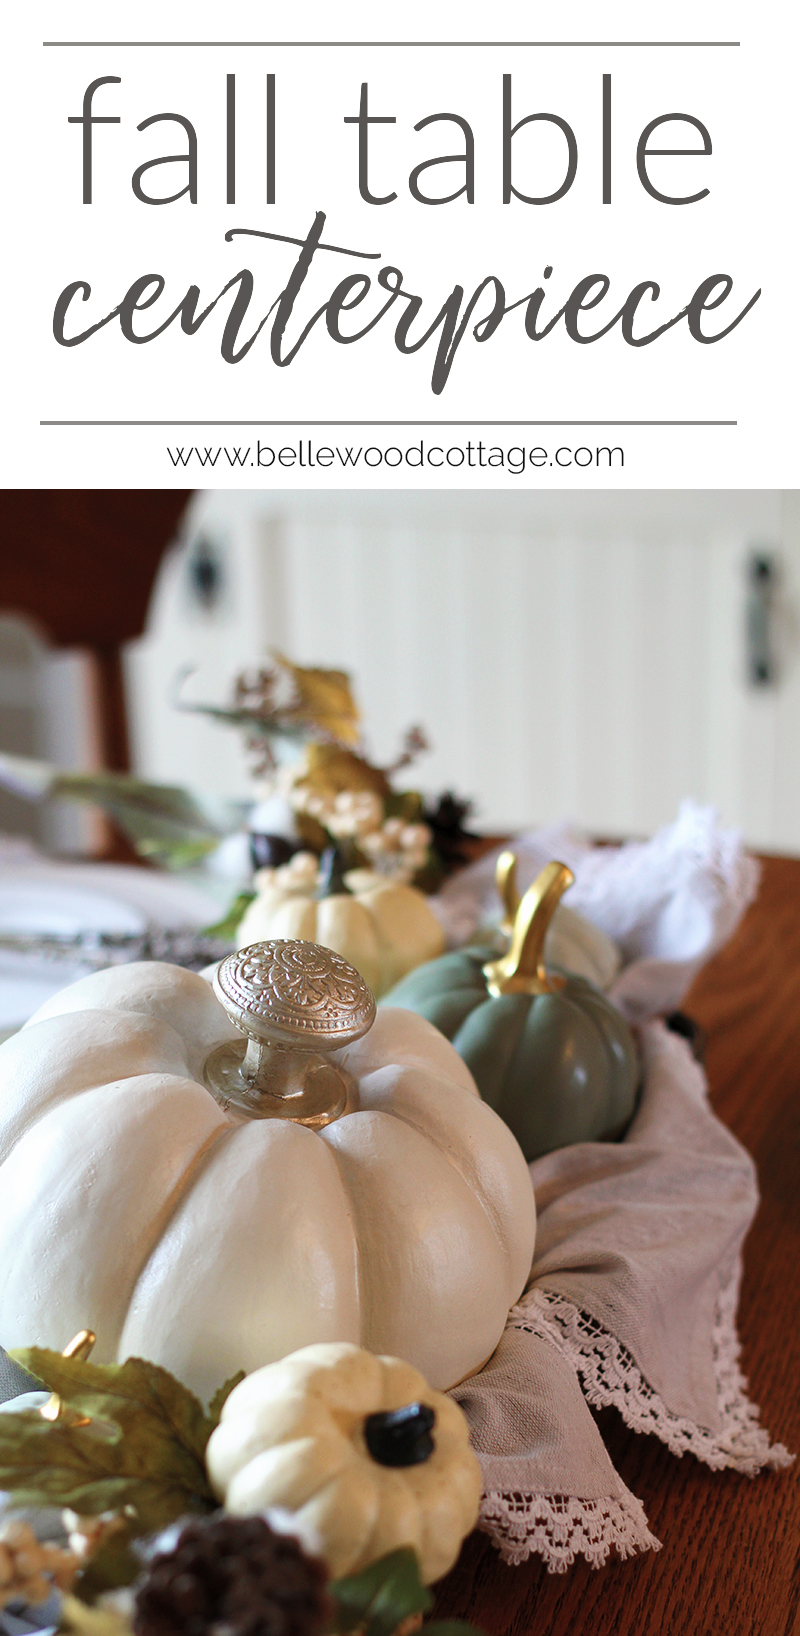 Learn how to make a simple farmhouse style fall table centerpiece using decor items you most likely already have around the house | Bellewood Cottage